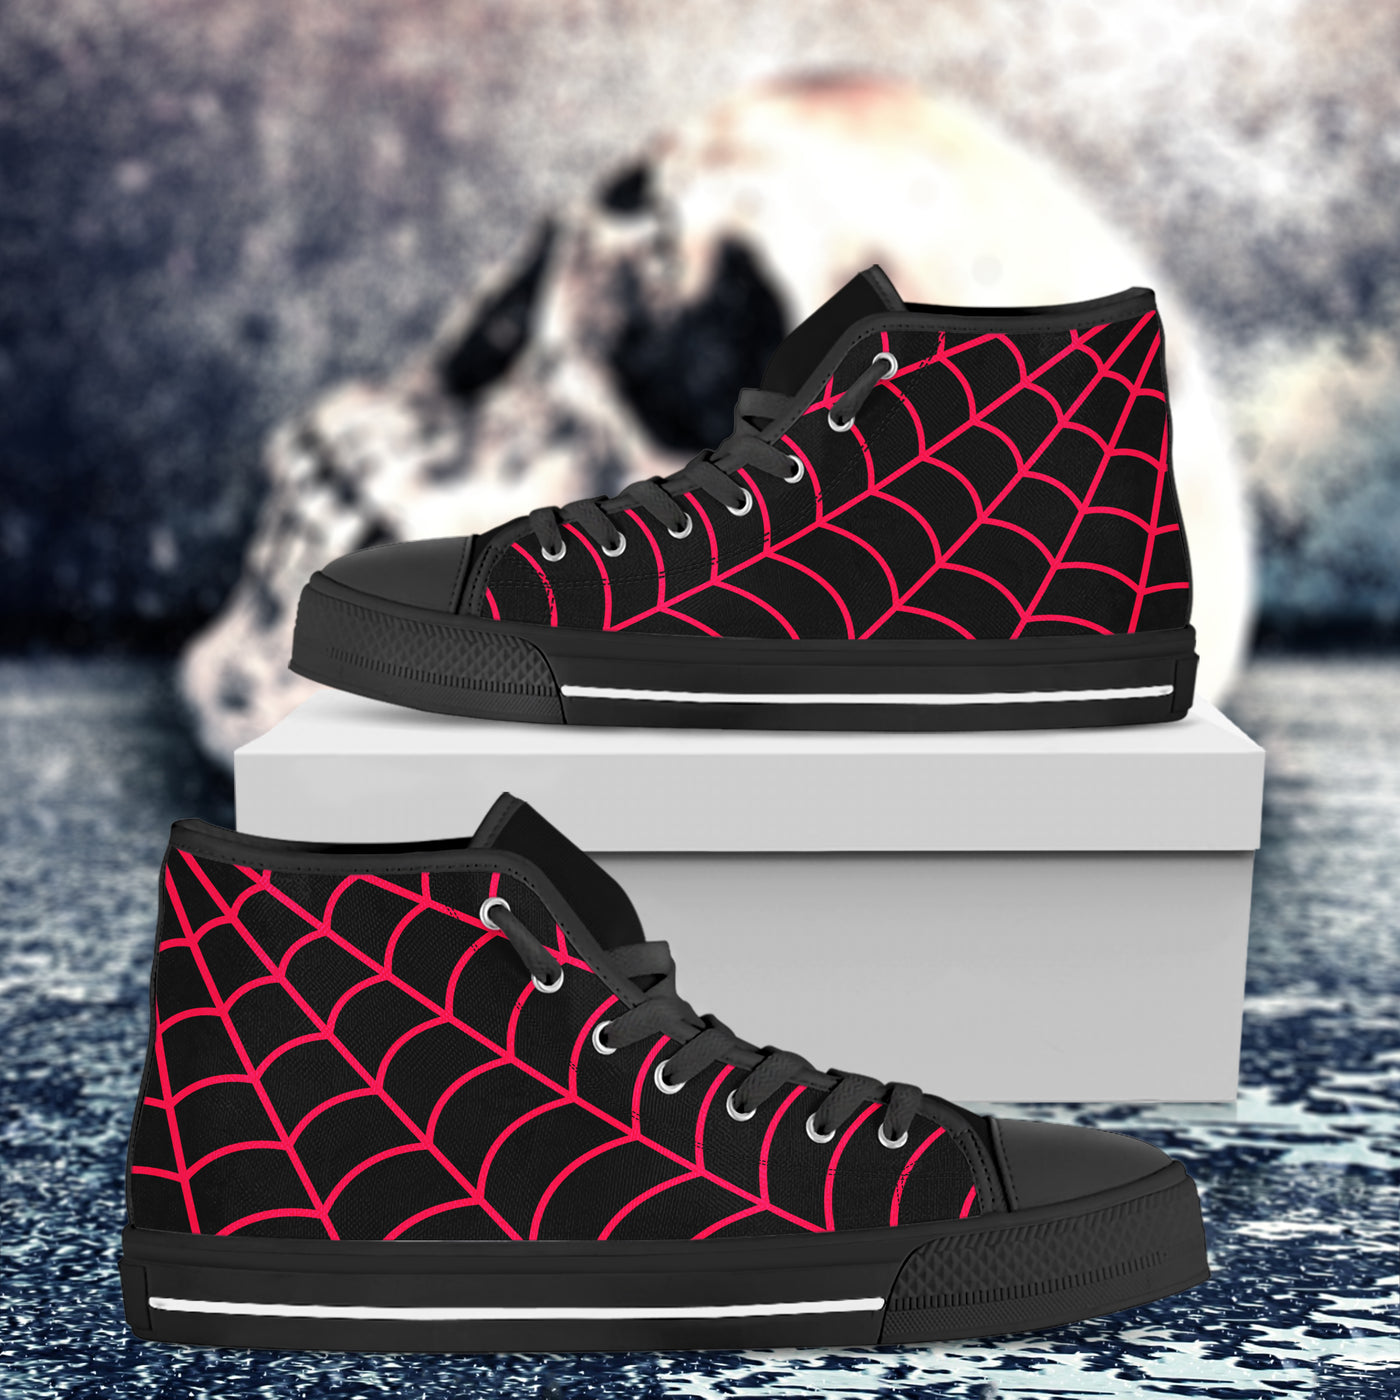 Thistle Neon Pink Spiderweb | Women's Classic High Top Canvas Shoes